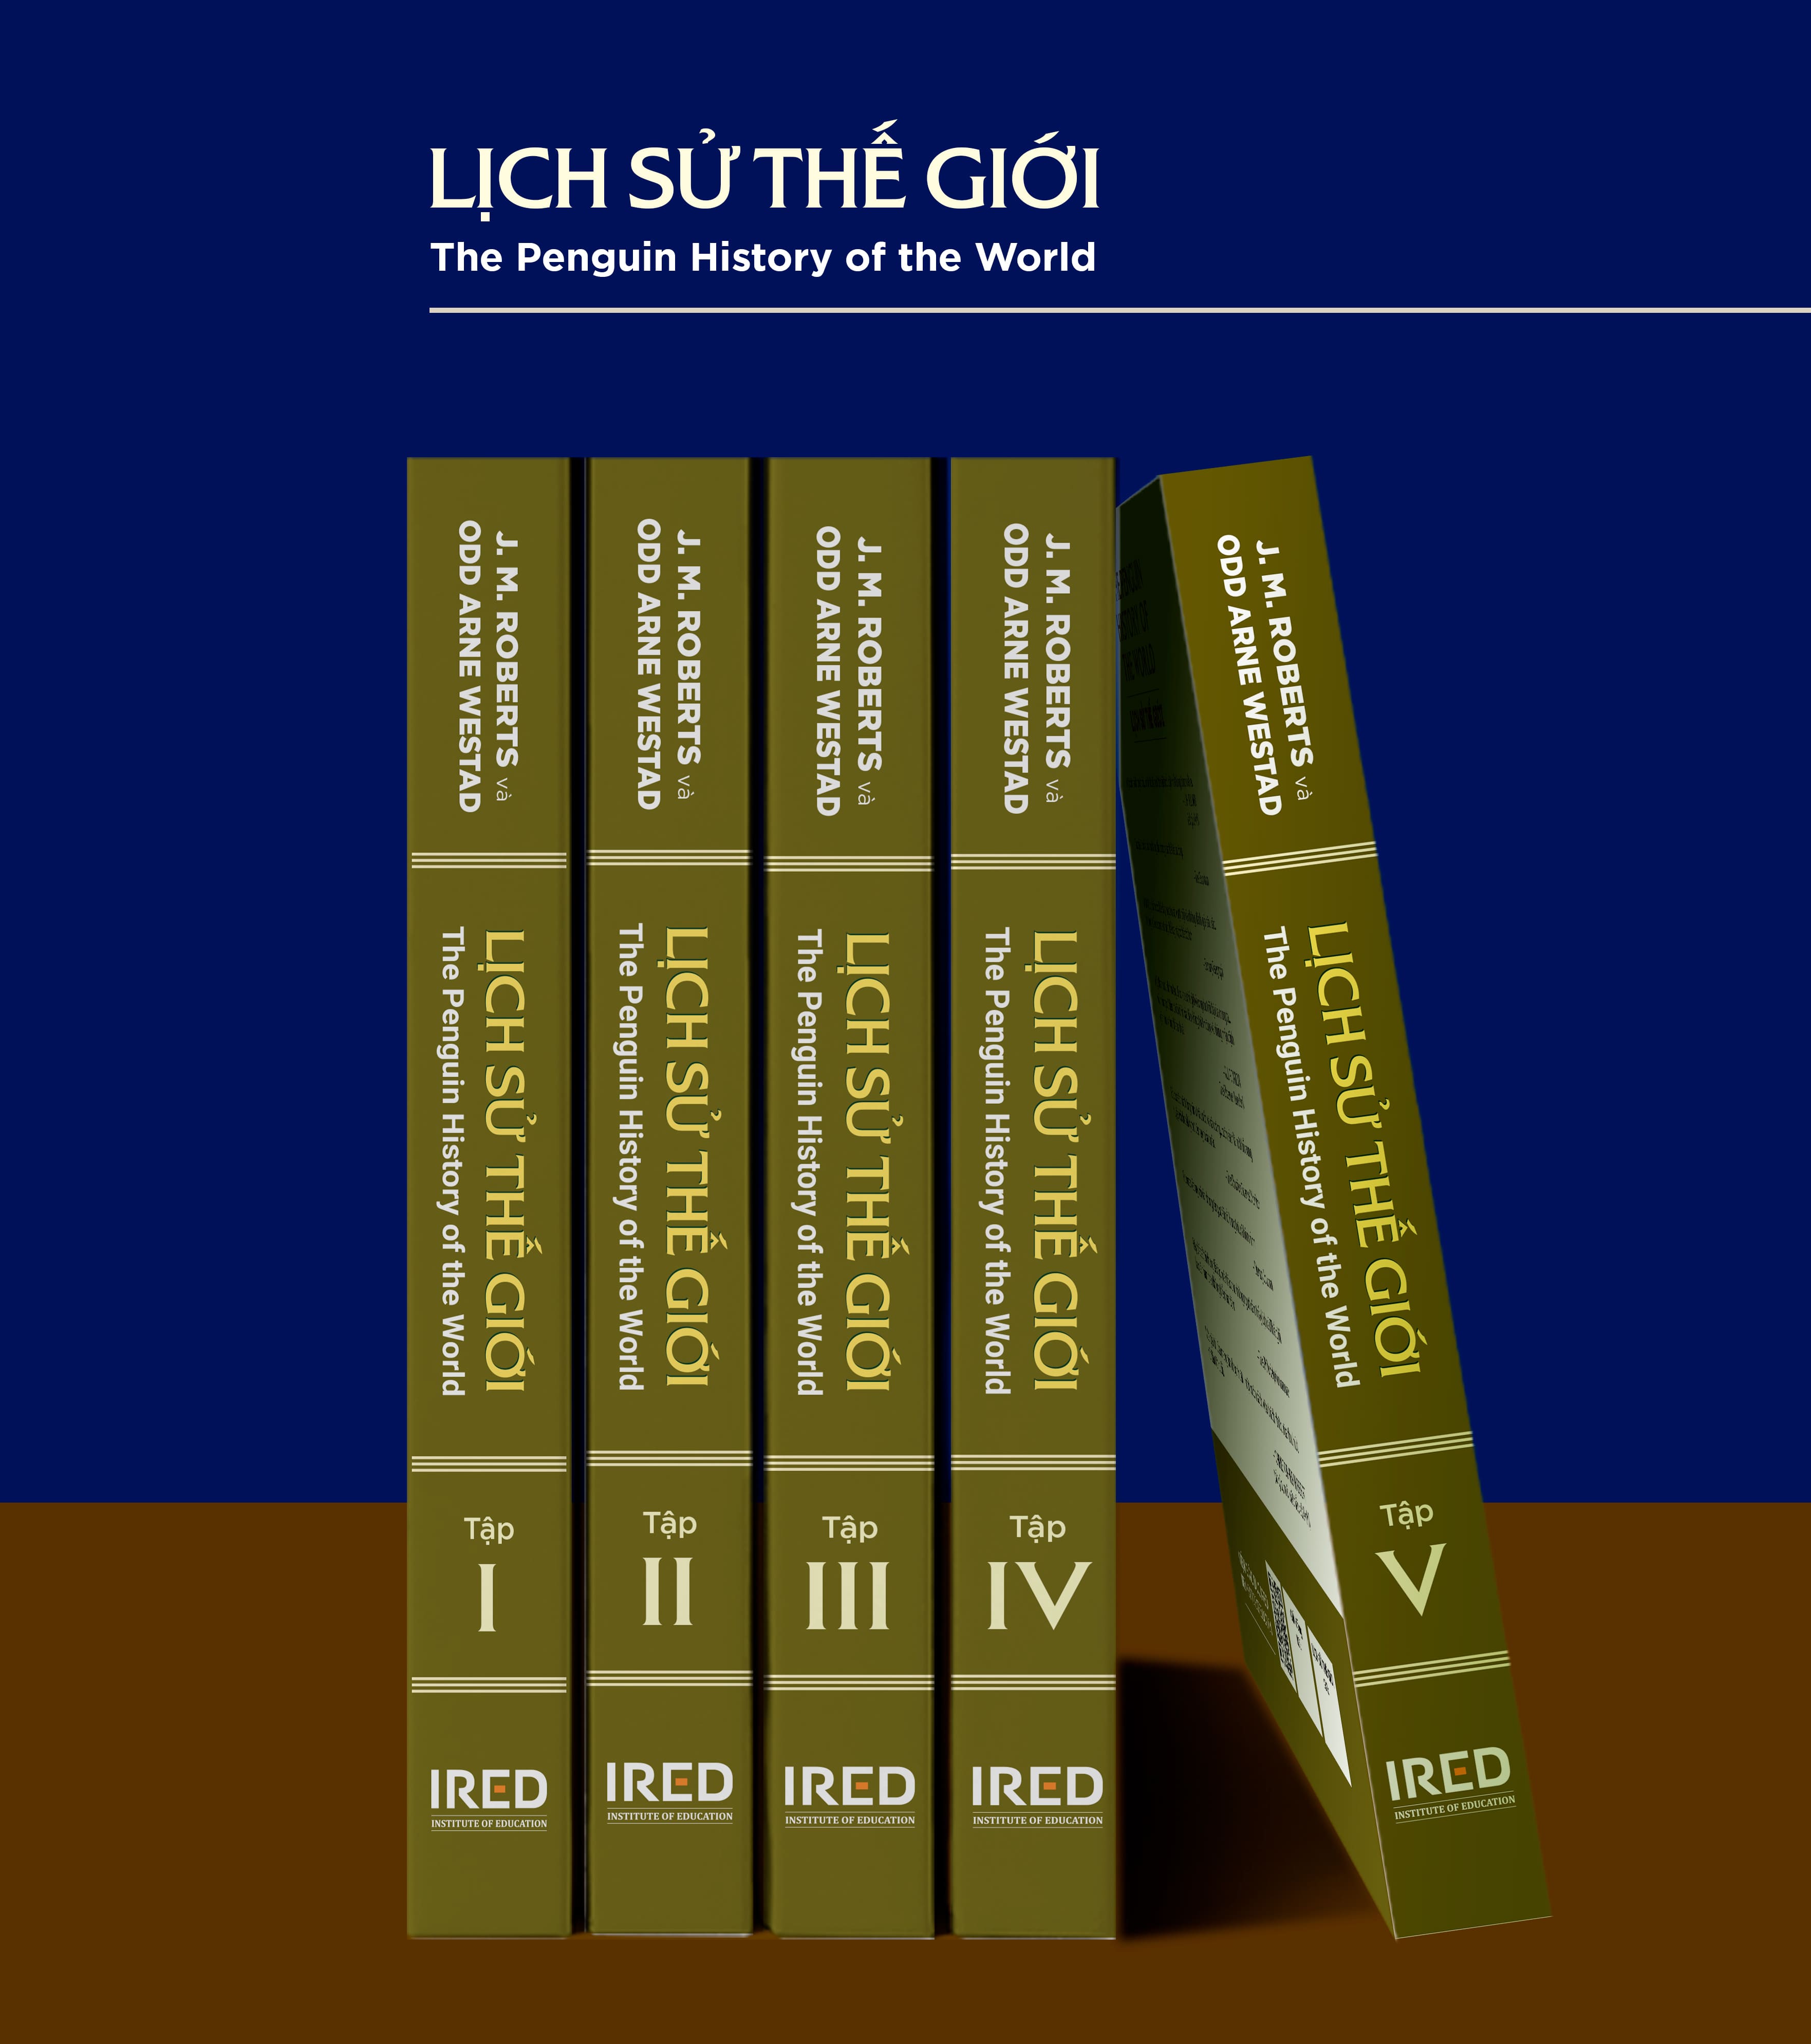 Sách IRED Books - Lịch Sử Thế Giới (The Penguin History of the World) - J. M. Roberts và Odd Arne Westad